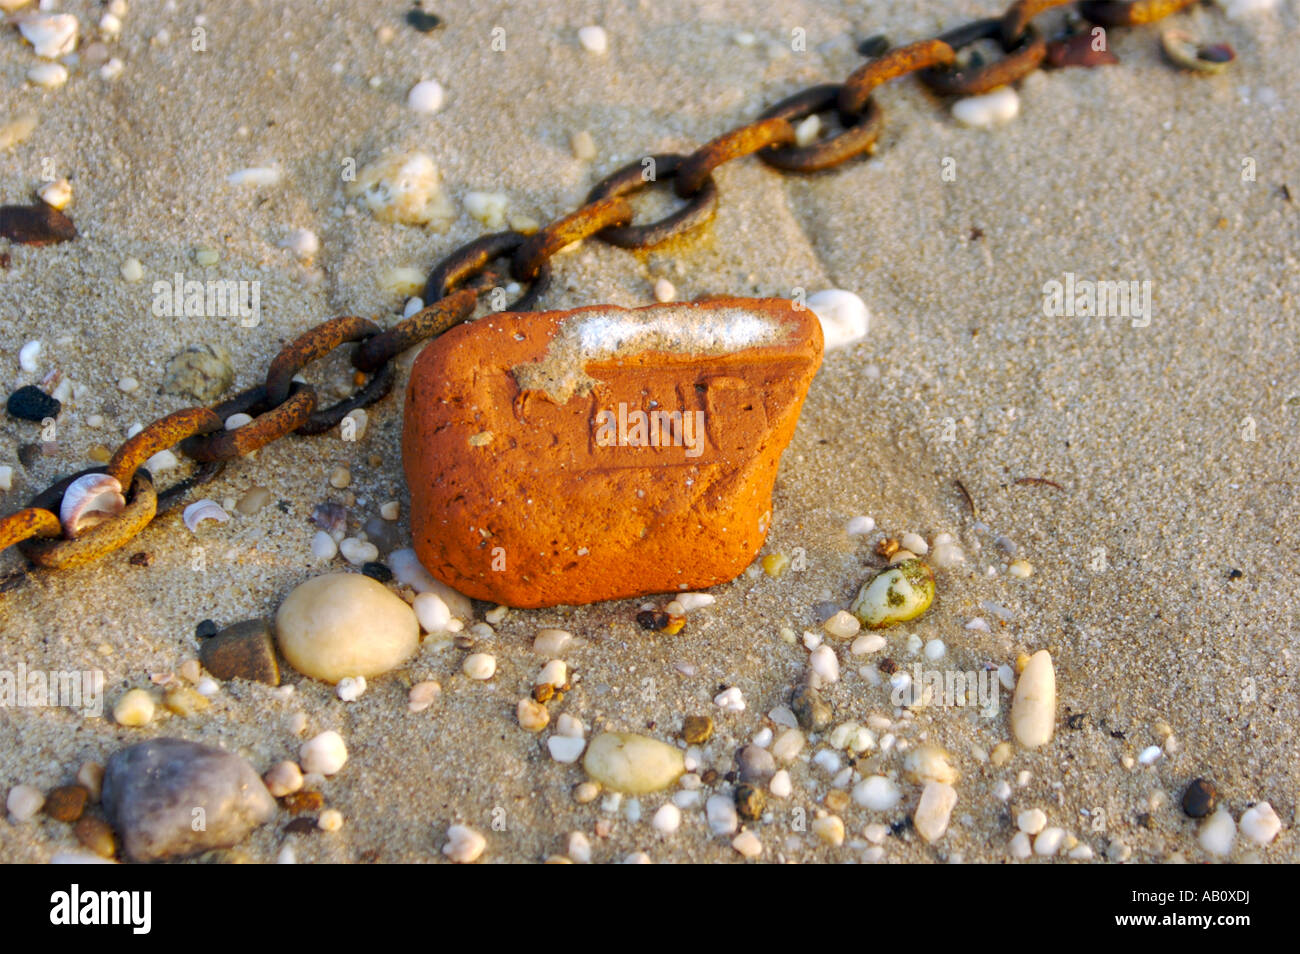 Rotten chain and brick on the beach Stock Photo